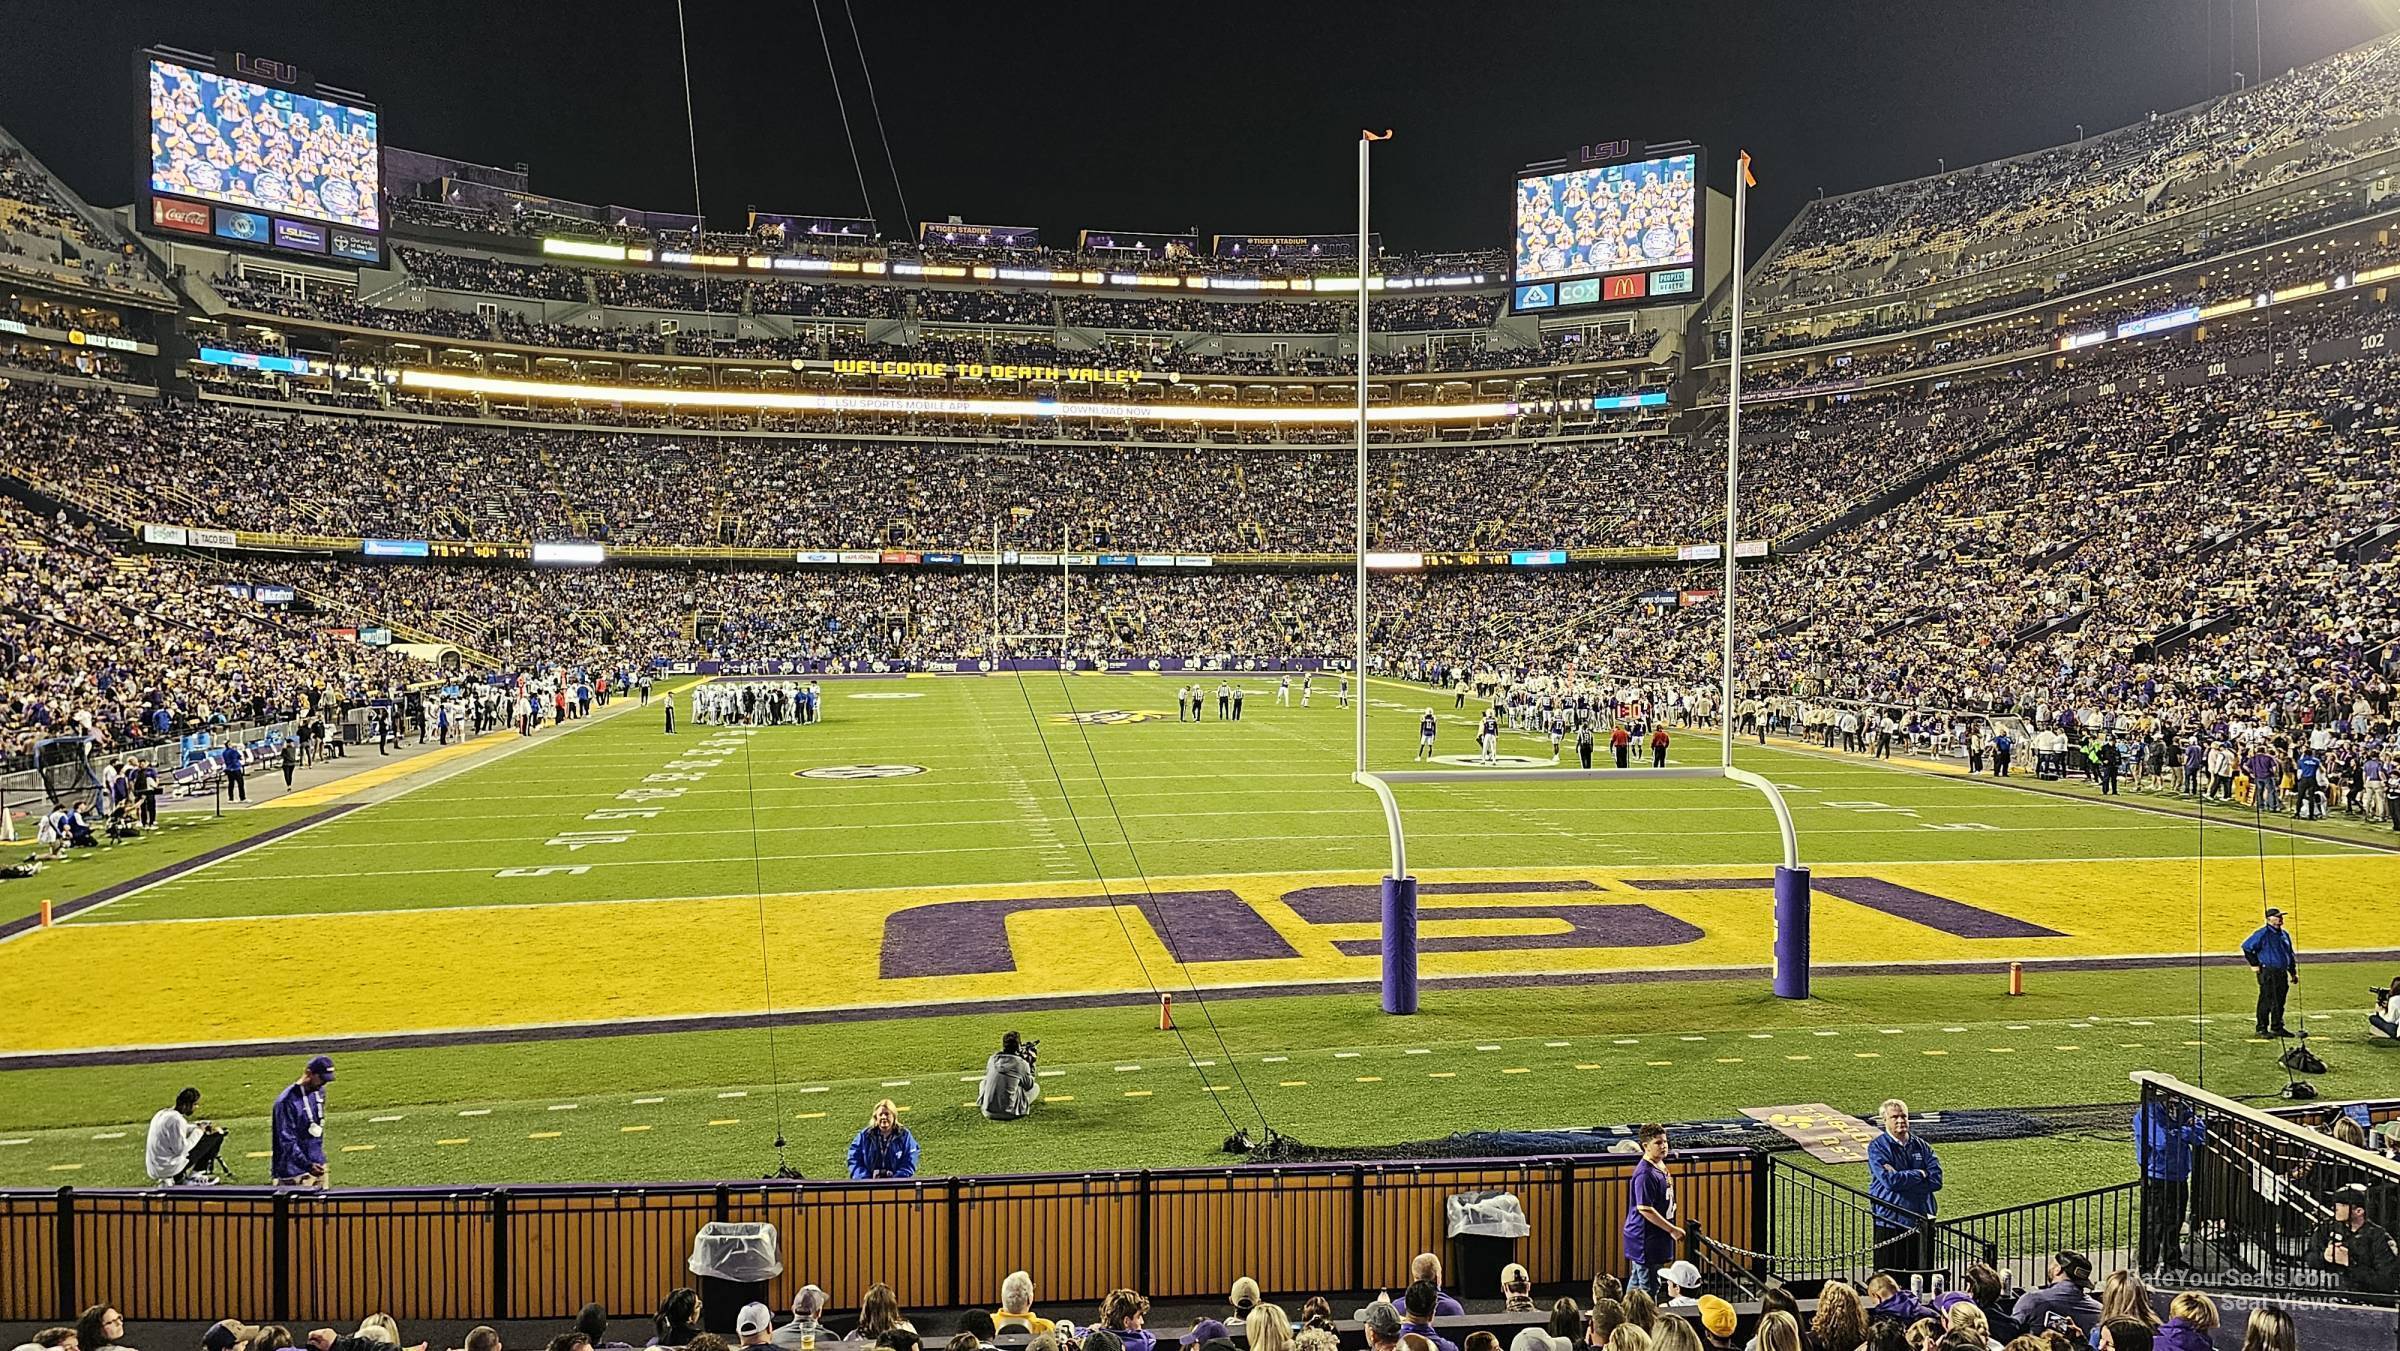 section 206, row 13 seat view  - tiger stadium